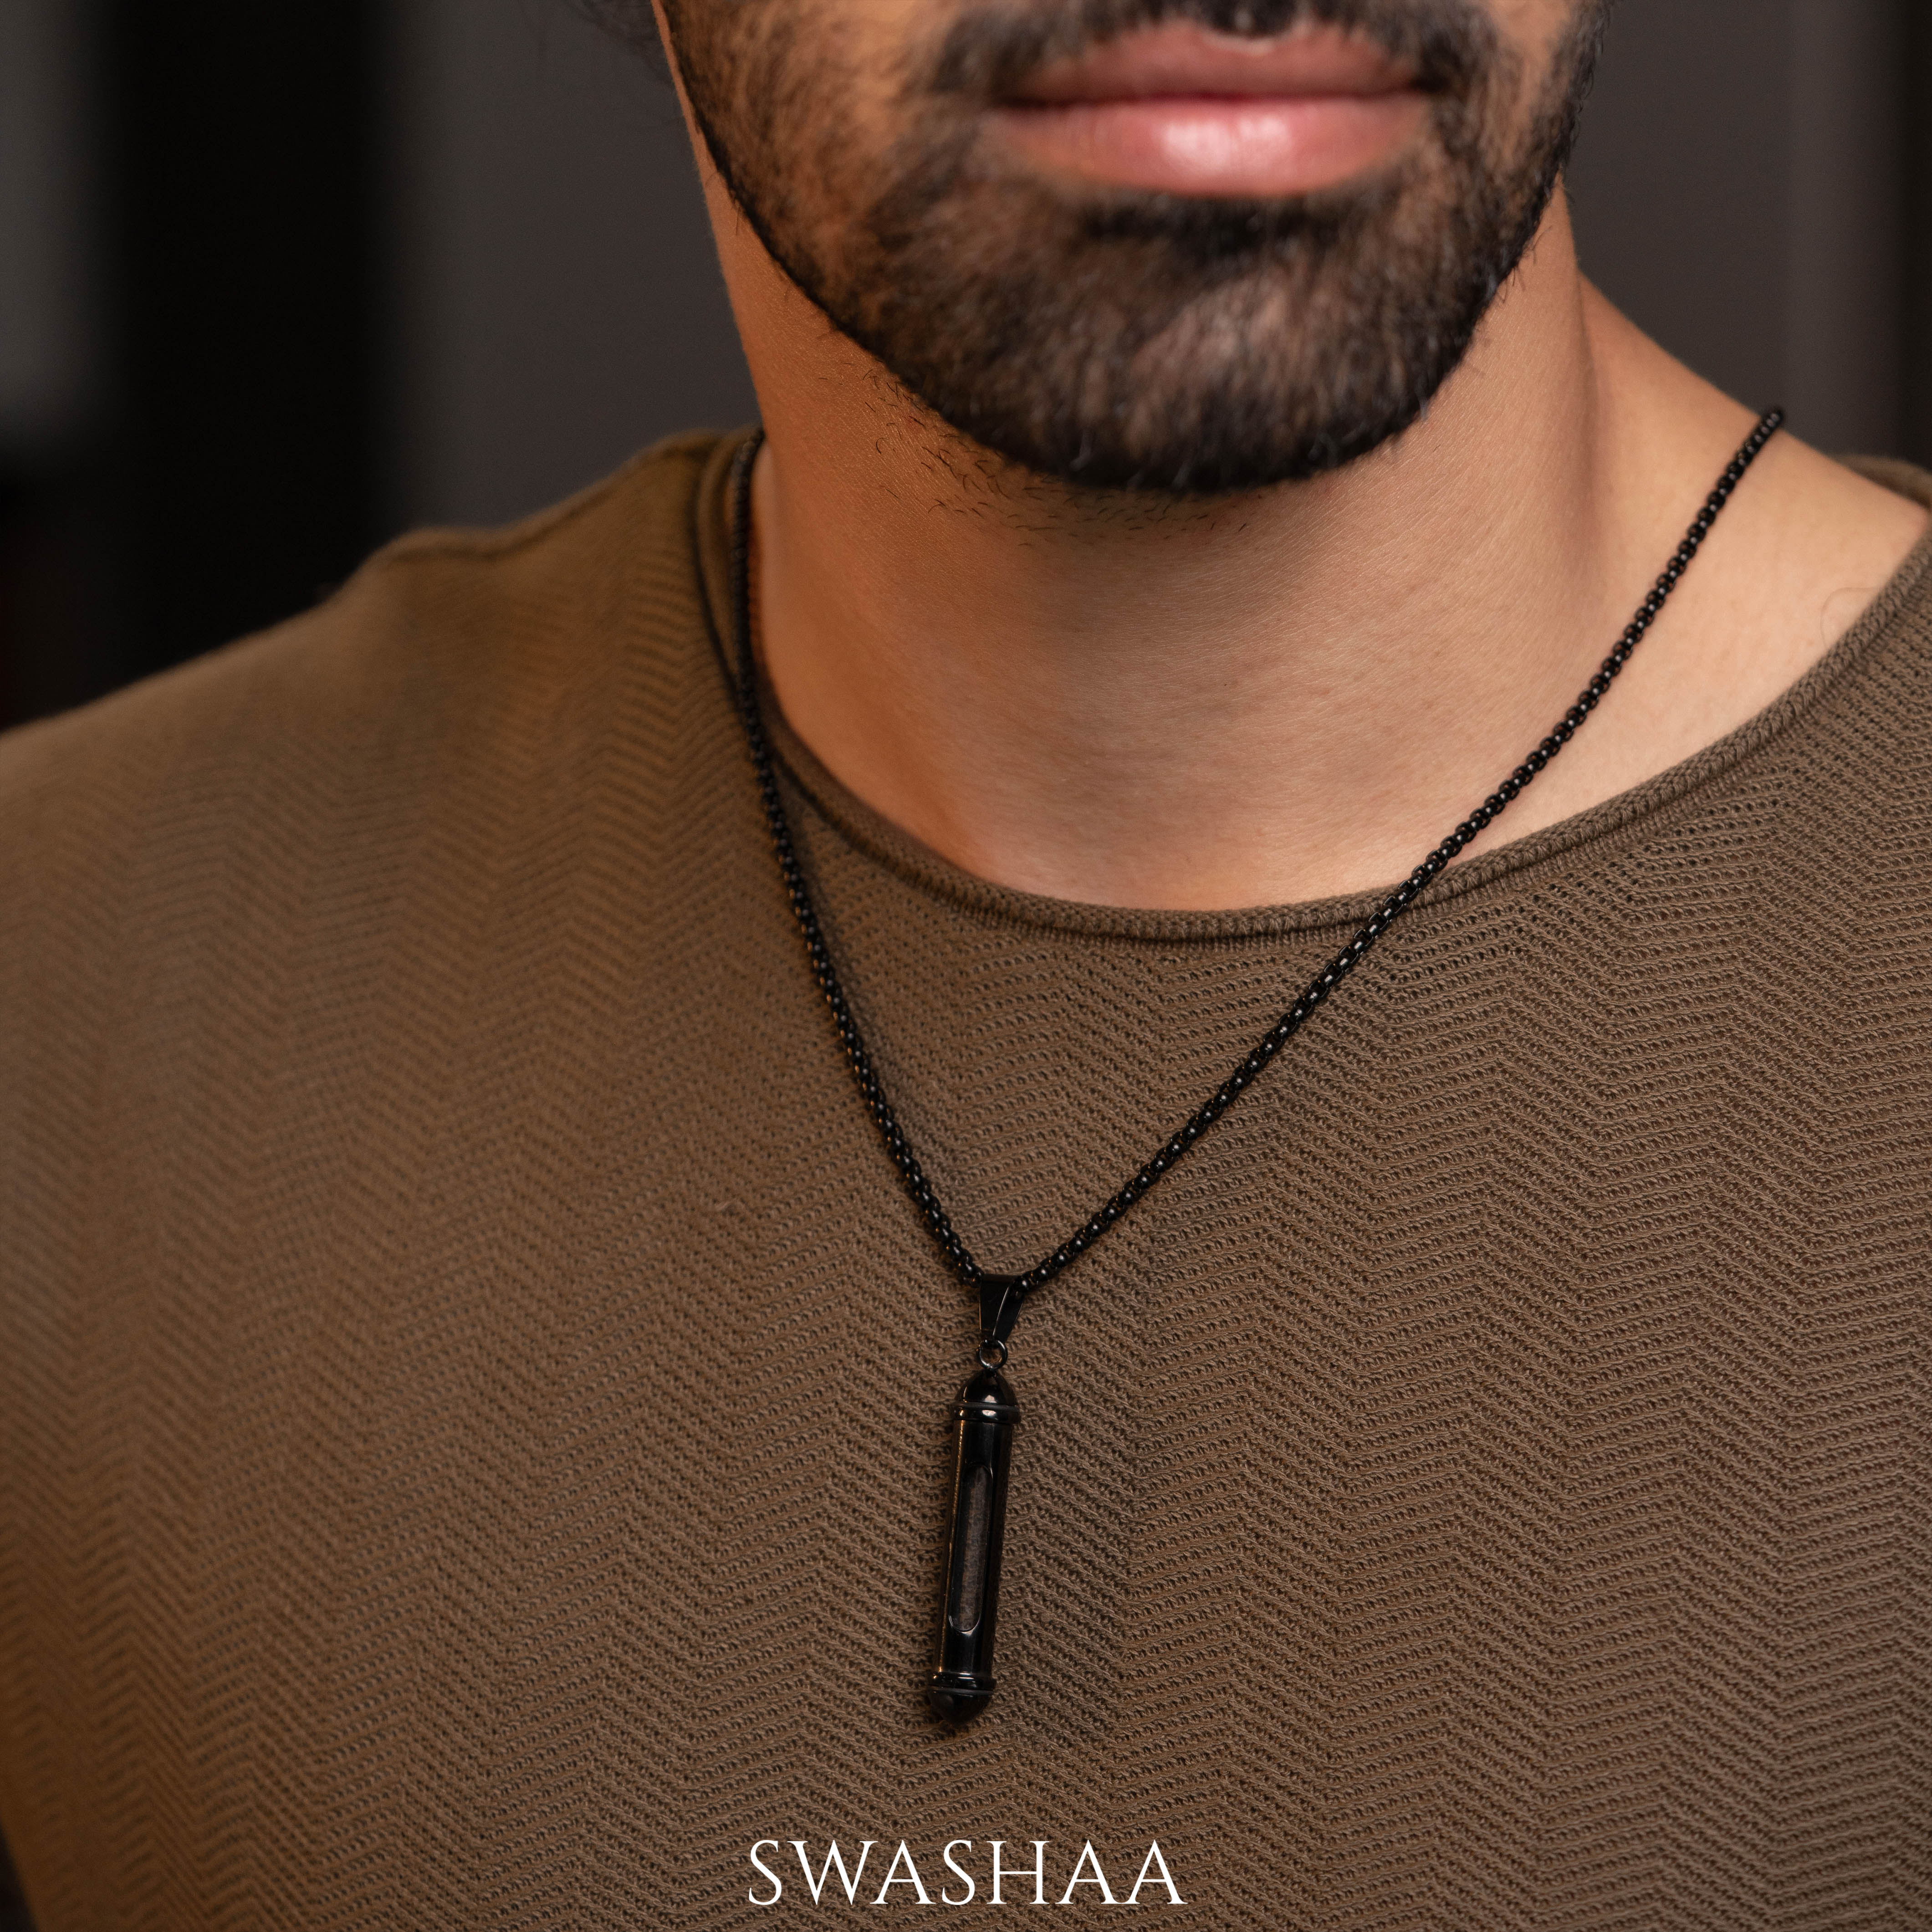 Mens Black Necklace - Chains for Men (12 mm) by Talisa